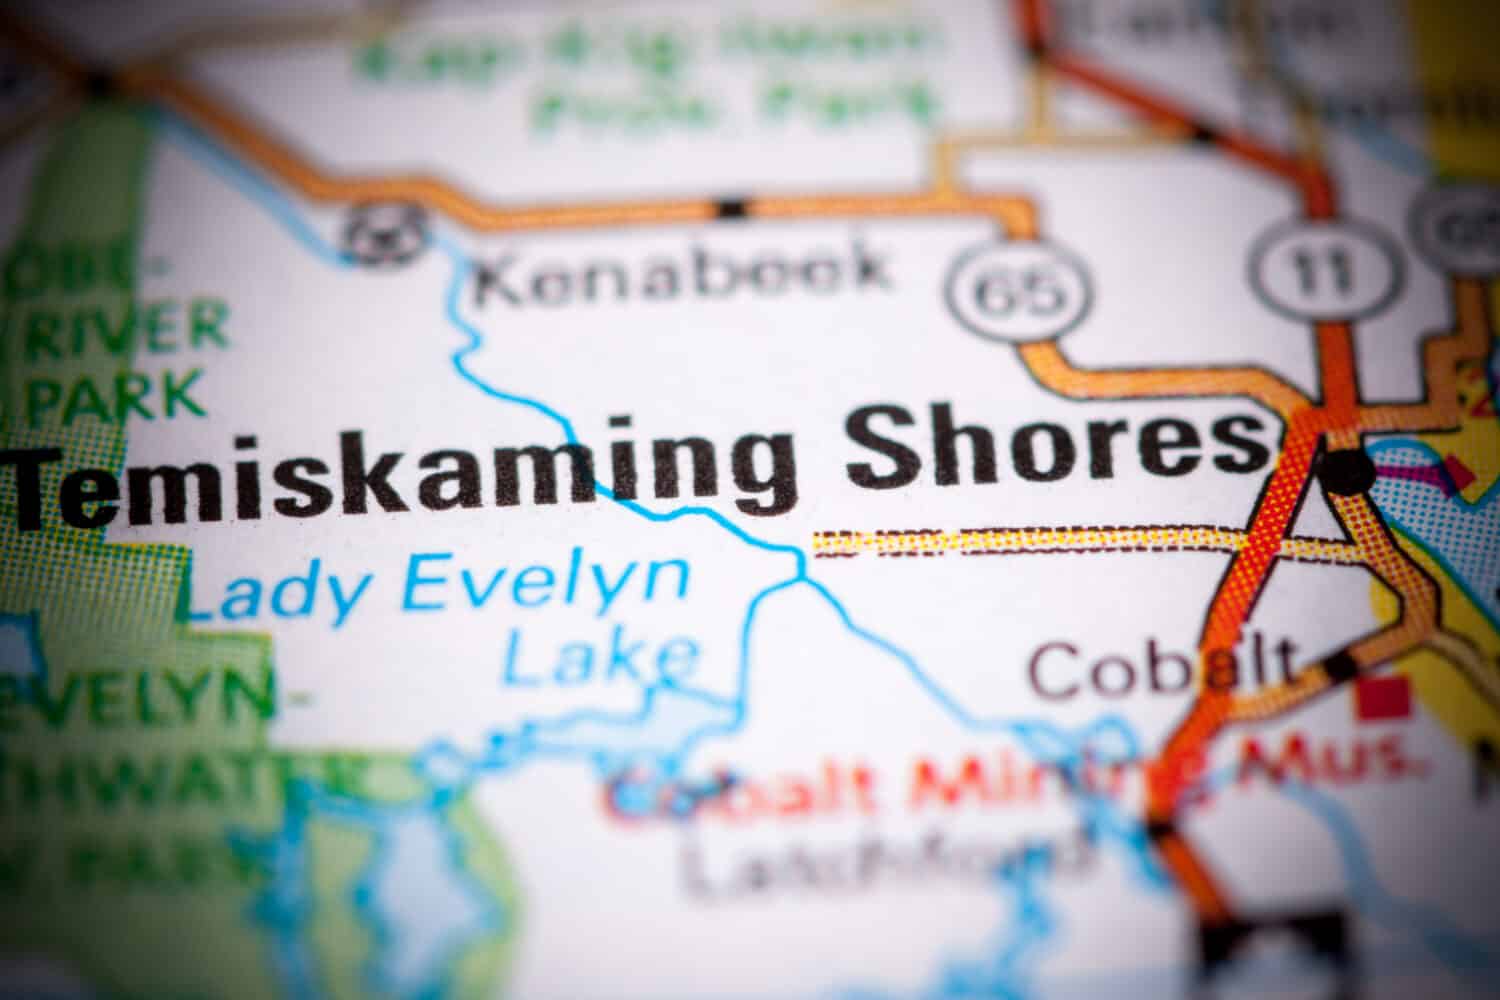 Temiskaming Shores. Canada on a map.